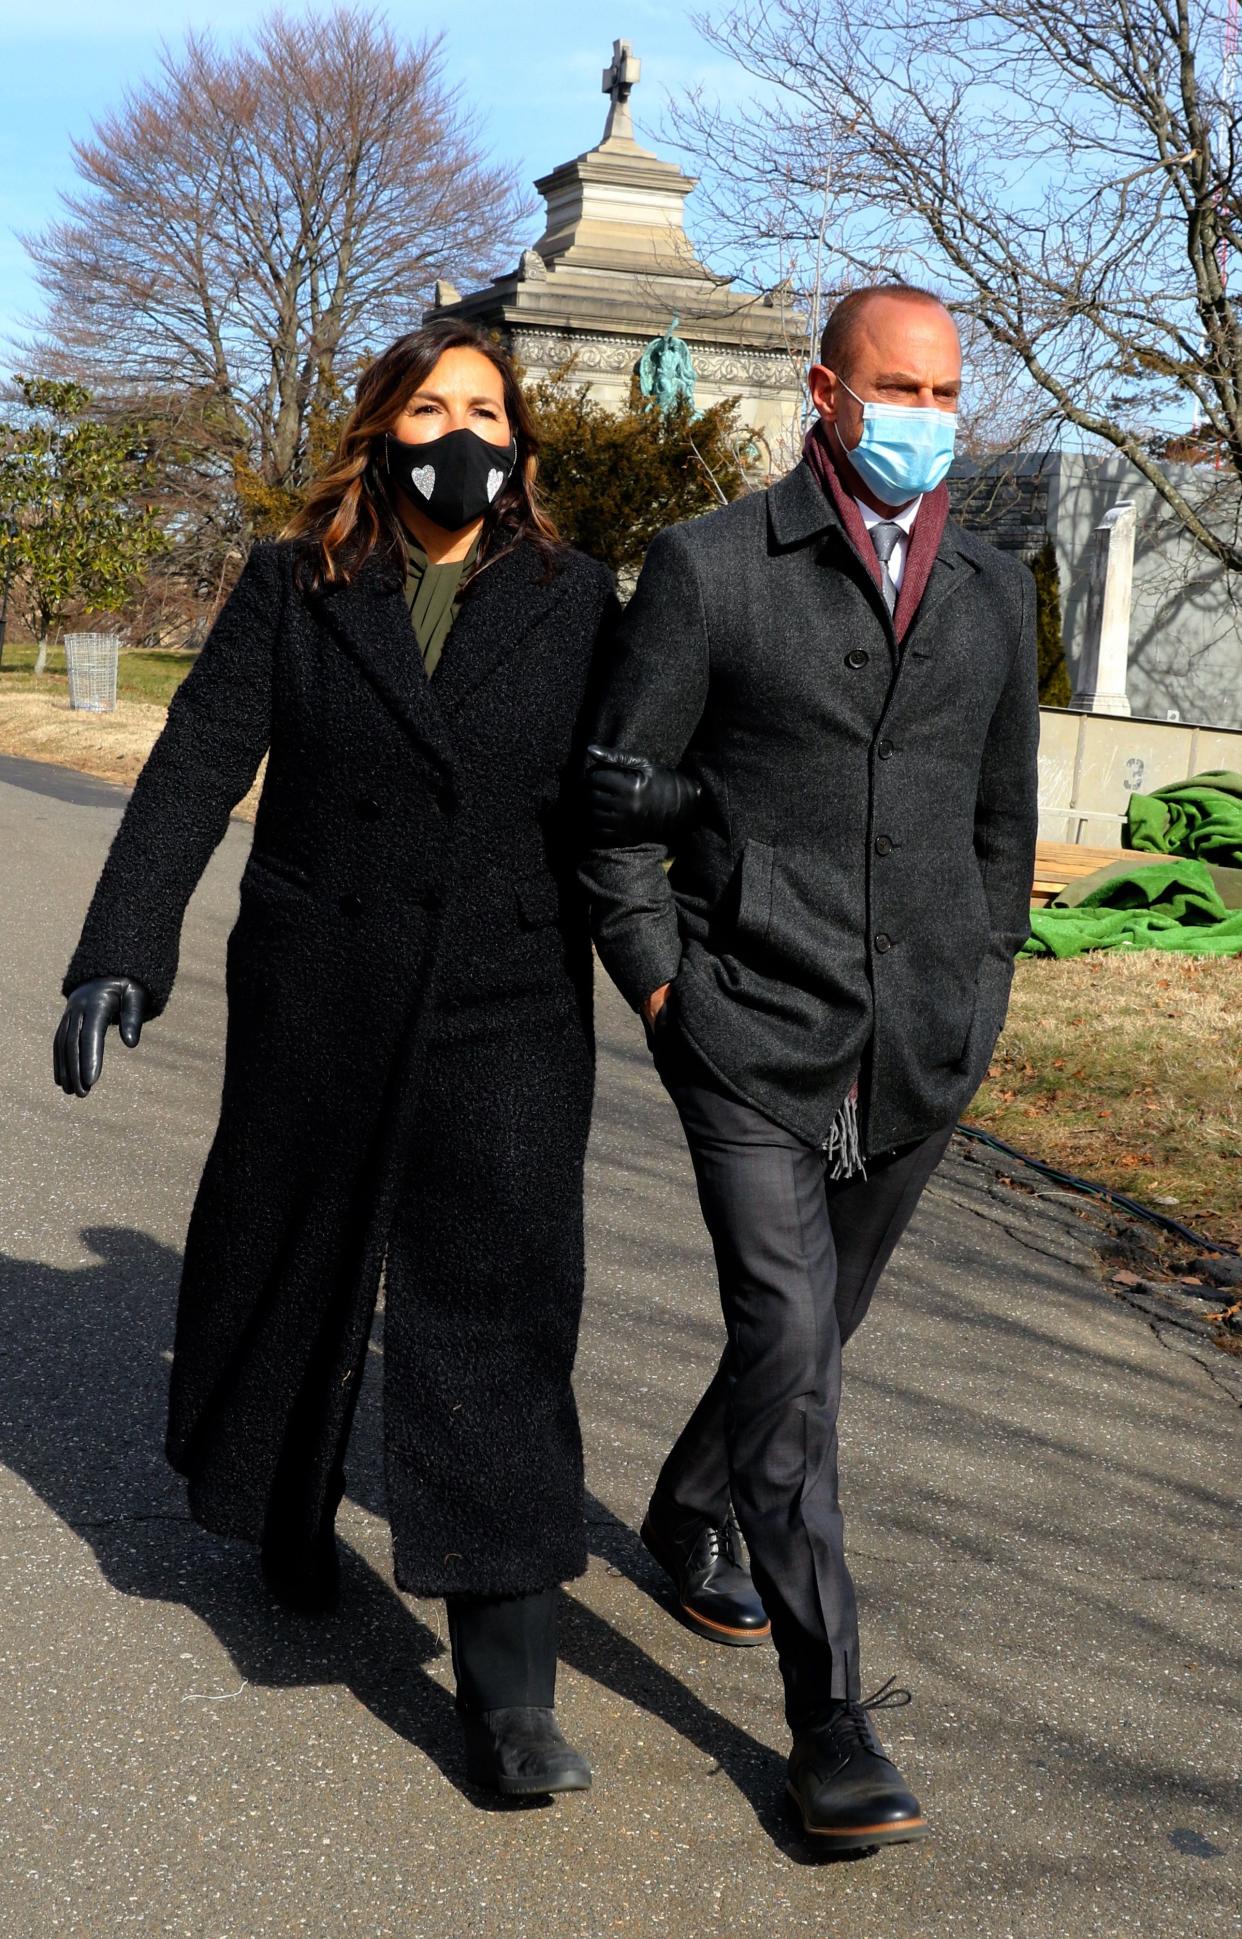 Mariska Hargitay and Christopher Meloni are seen on the set of "Law and Order: SVU" on Jan. 25, 2021, in New York City.